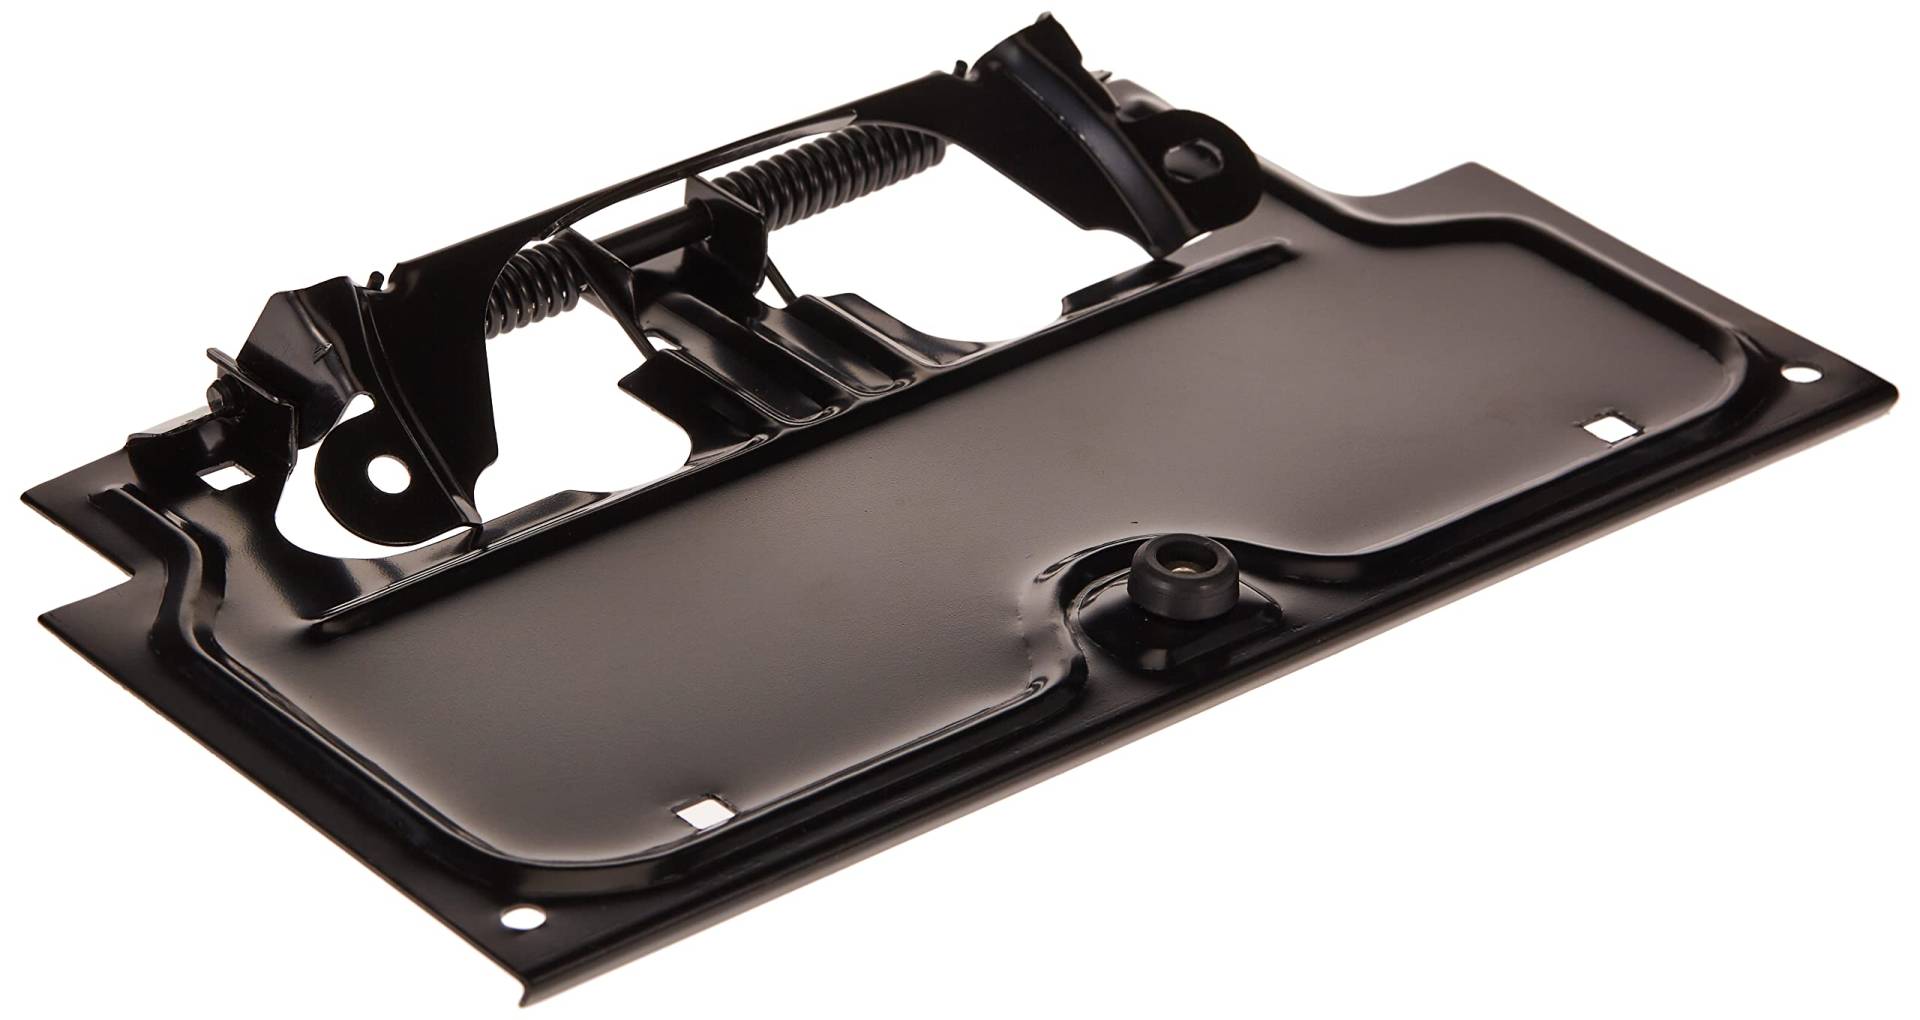 Omix-Ada | 11233.01 | License Plate Bracket, Black | OE Reference: 55007403 | Fits 1978-1995 Jeep Wrangler YJ von Omix